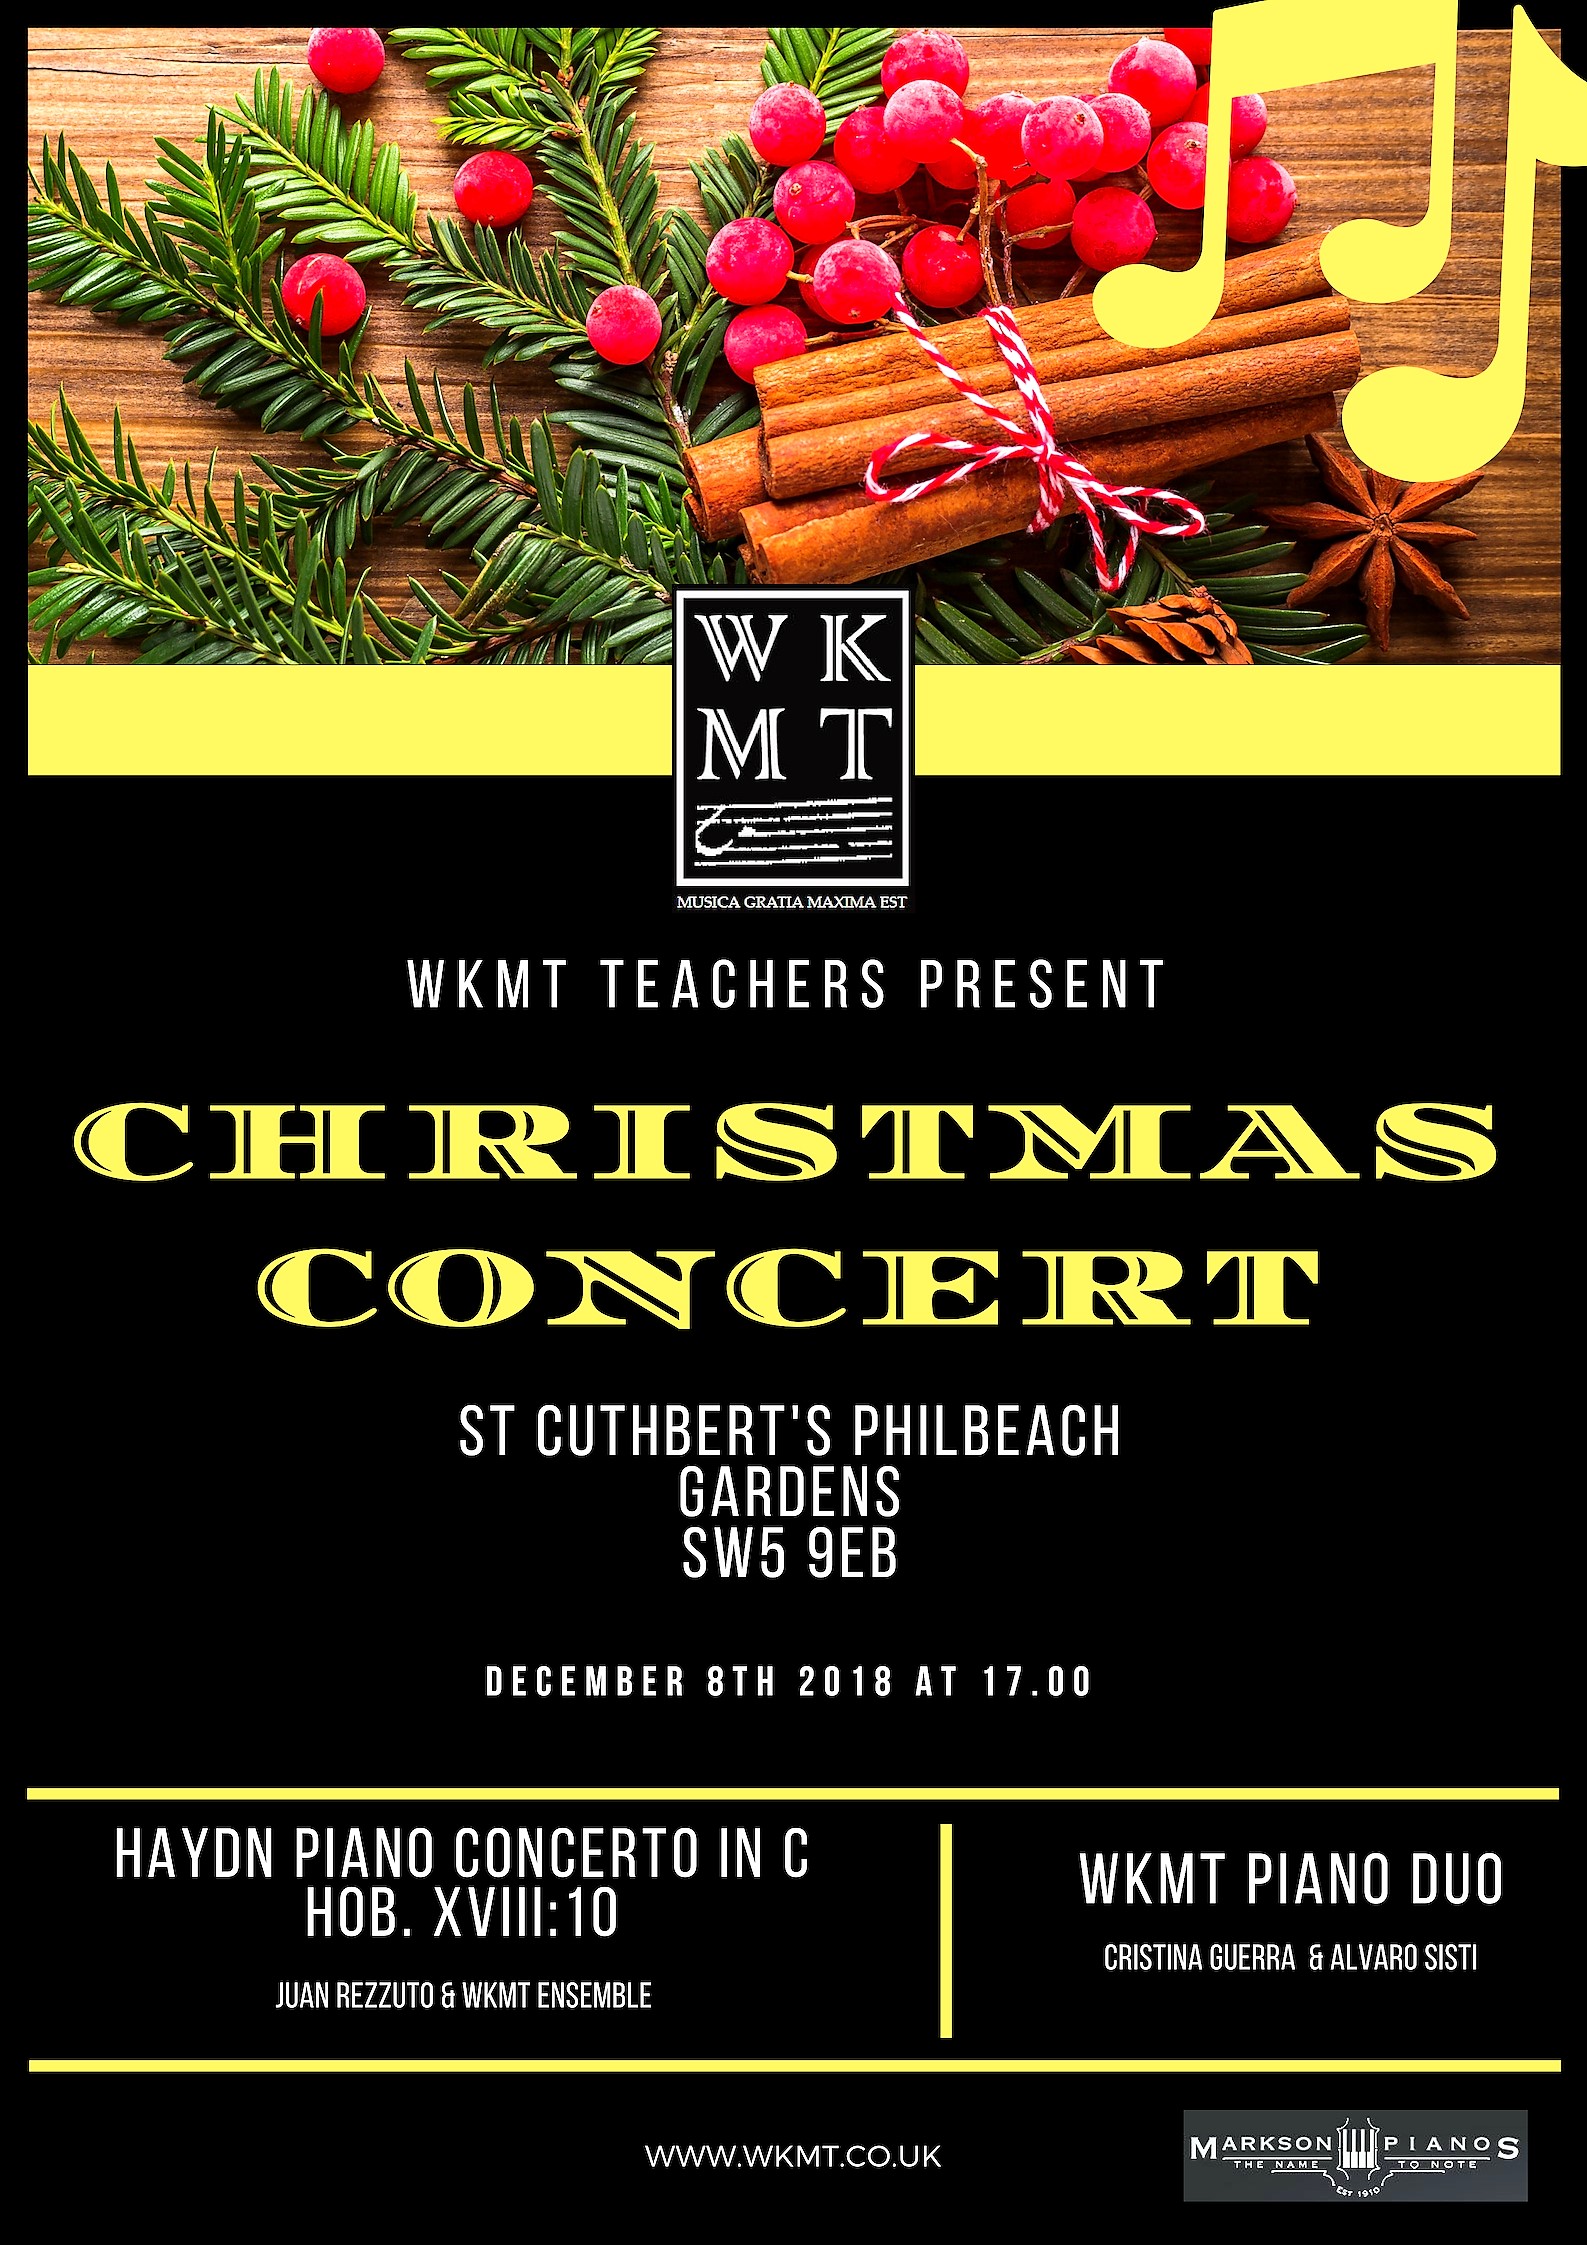 Two New Piano Performances by WKMT